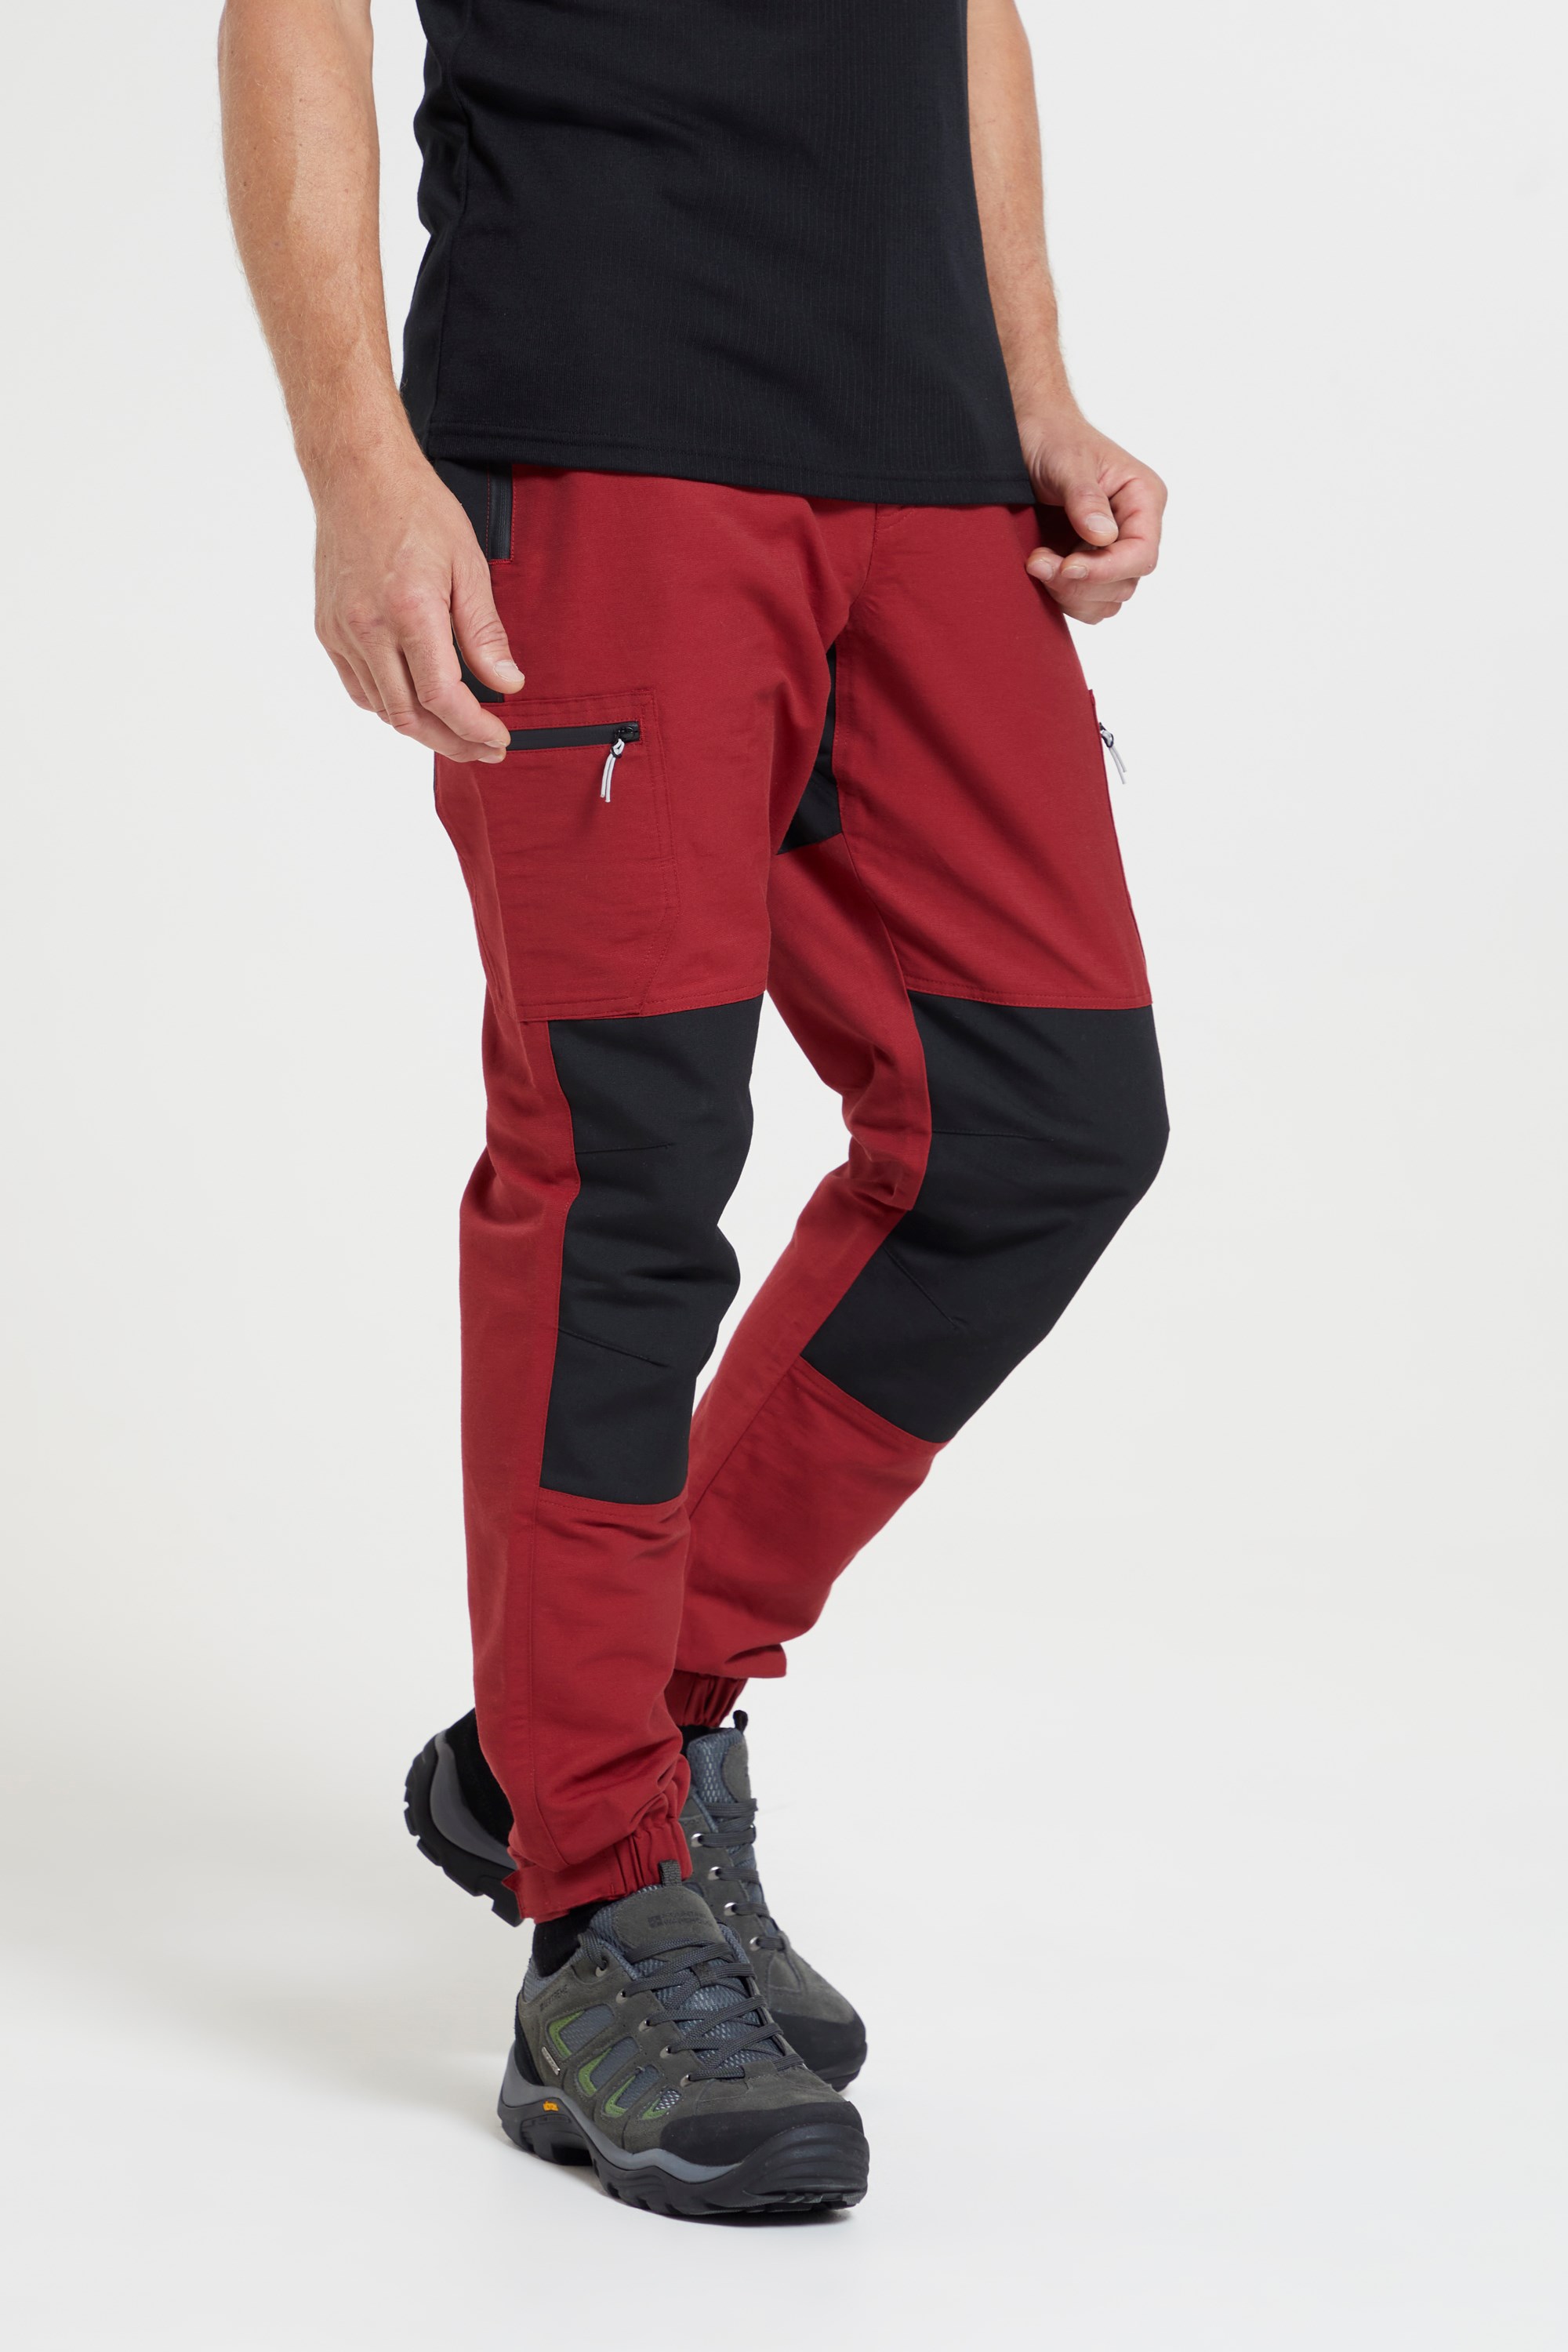 PSS Mens Outdoor trousers Felxible at low prices  Askari Hunting Shop